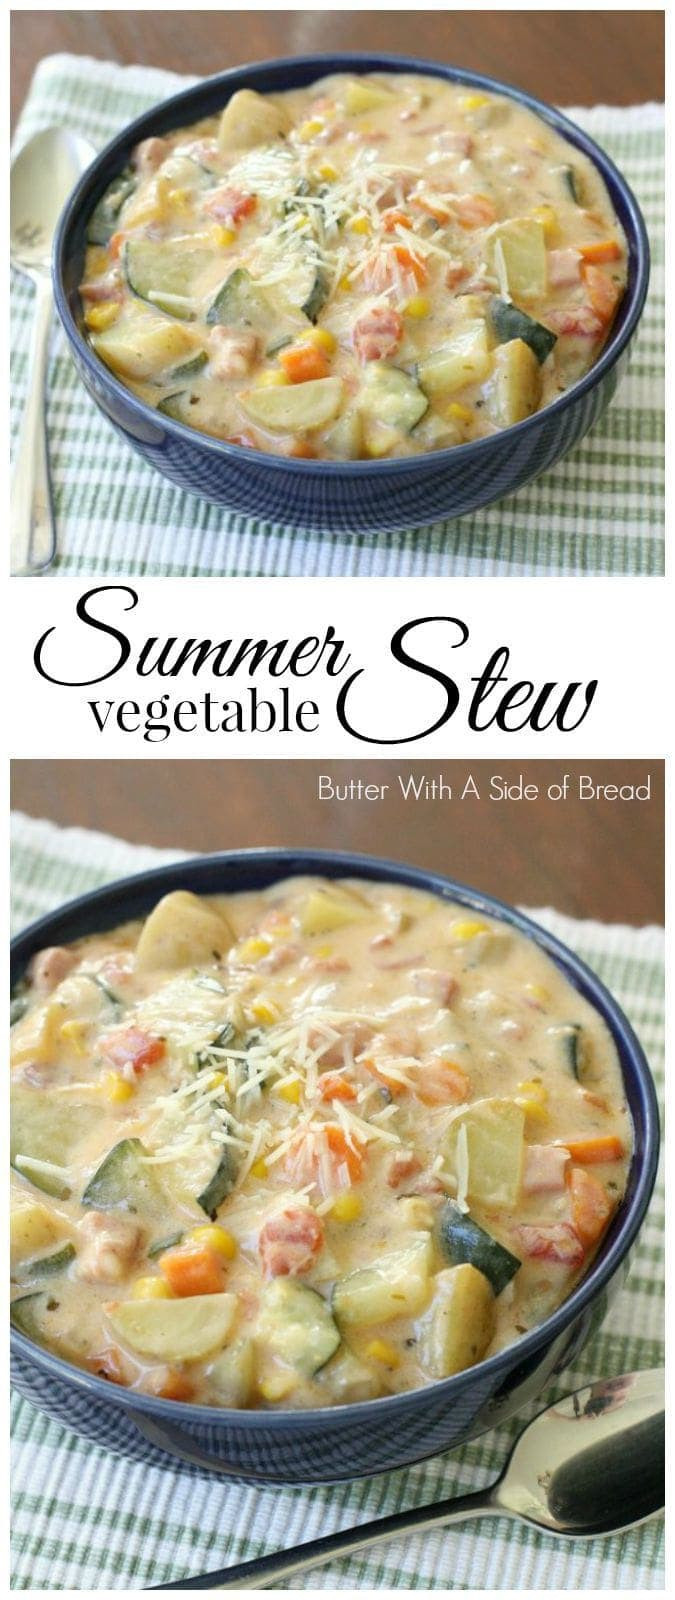 Summer Stew Recipes
 SUMMER VEGETABLE STEW Butter with a Side of Bread